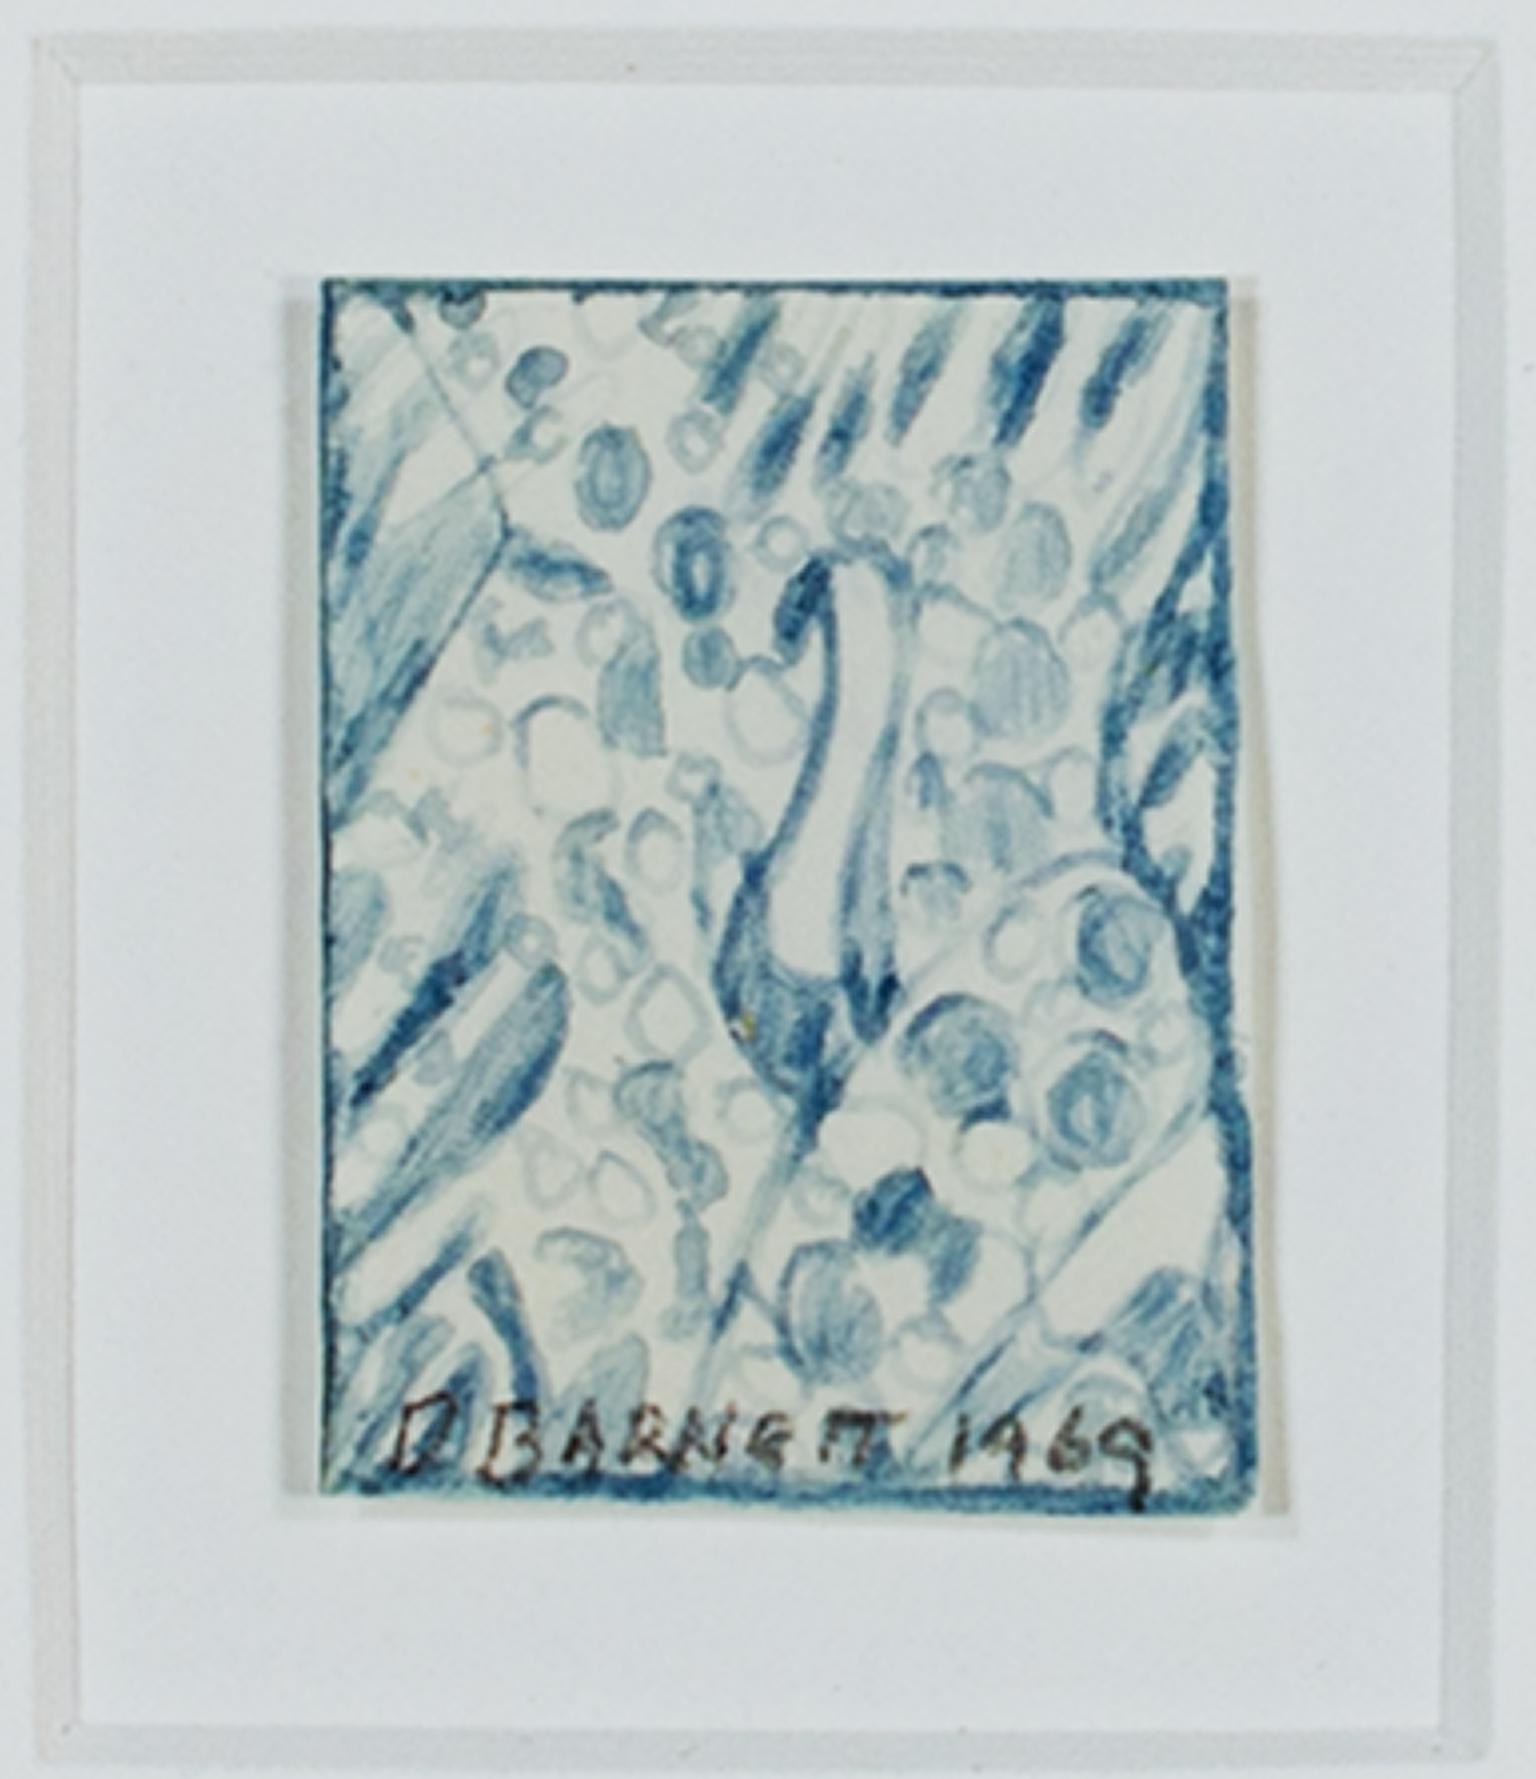 "Bird" is an original pencil drawing by David Barnett, signed along the bottom edge. The entire work is about the size of a postage stamp and includes an abstract representation of a bird amid foliage. 

Art size: 1 1/2" x 1"
Frame size: 8" x 7